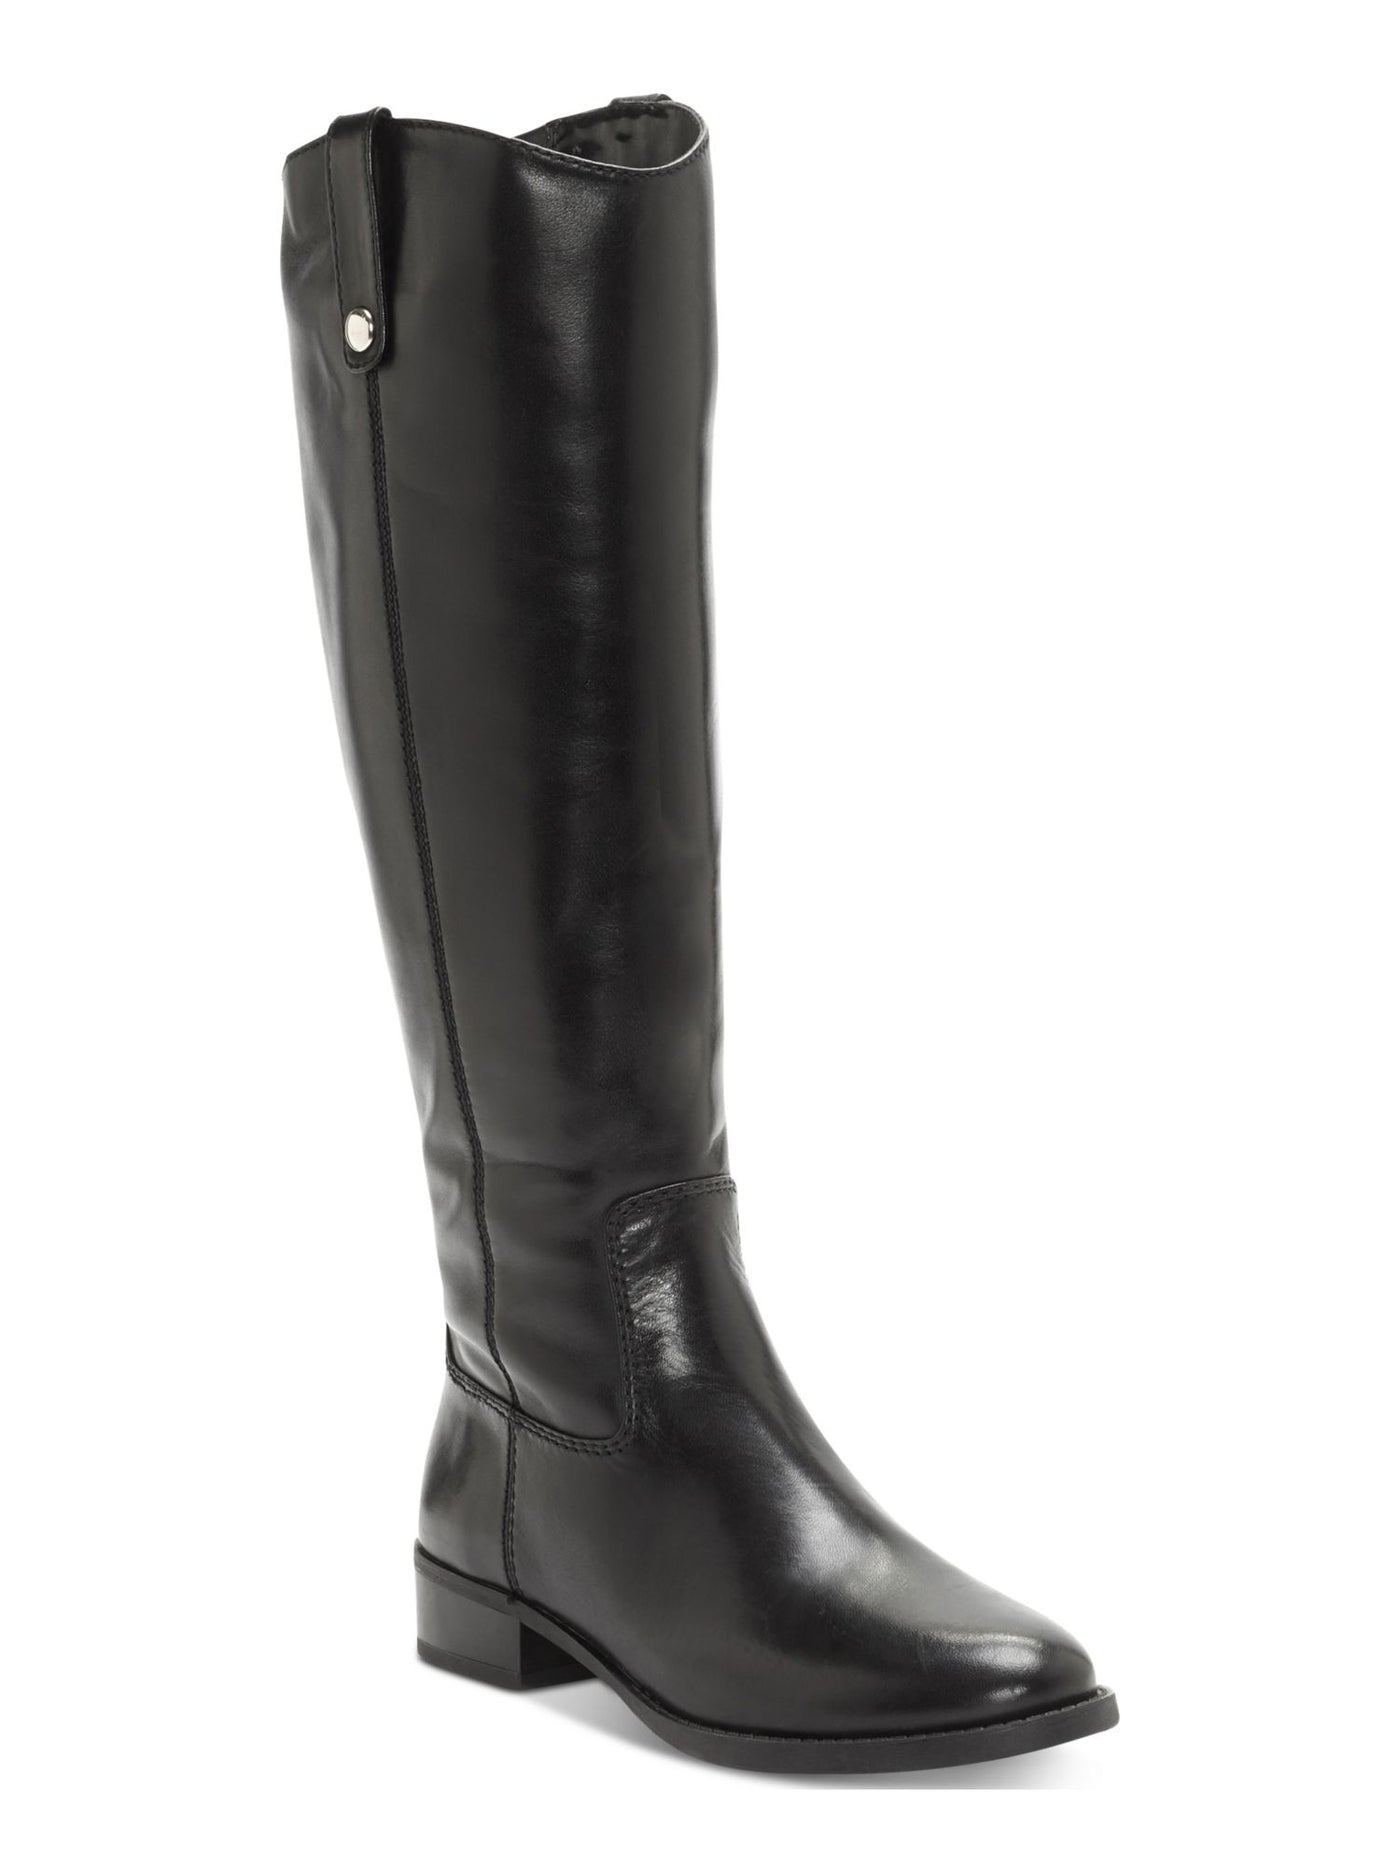 INC Womens Black Fawne Round Toe Stacked Heel Zip-Up Leather Riding Boot 6